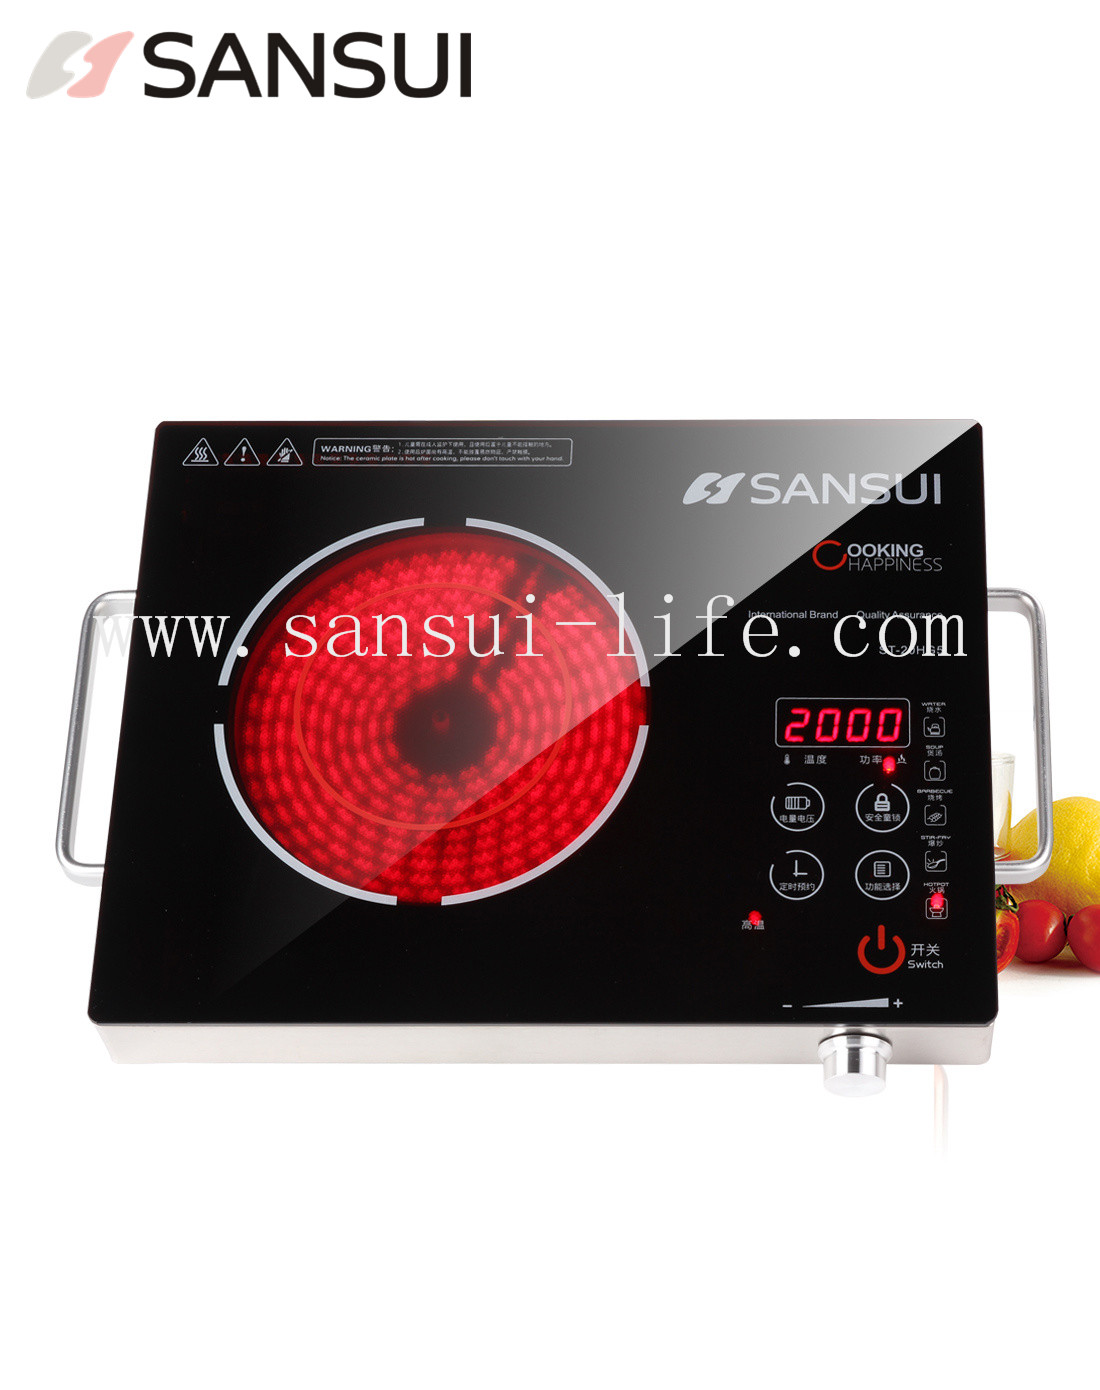 SANSUI 20X1 Multifunction Infrared Cooker, stainless steel, for cook, BBQ, for warm, 2000W, with 3C